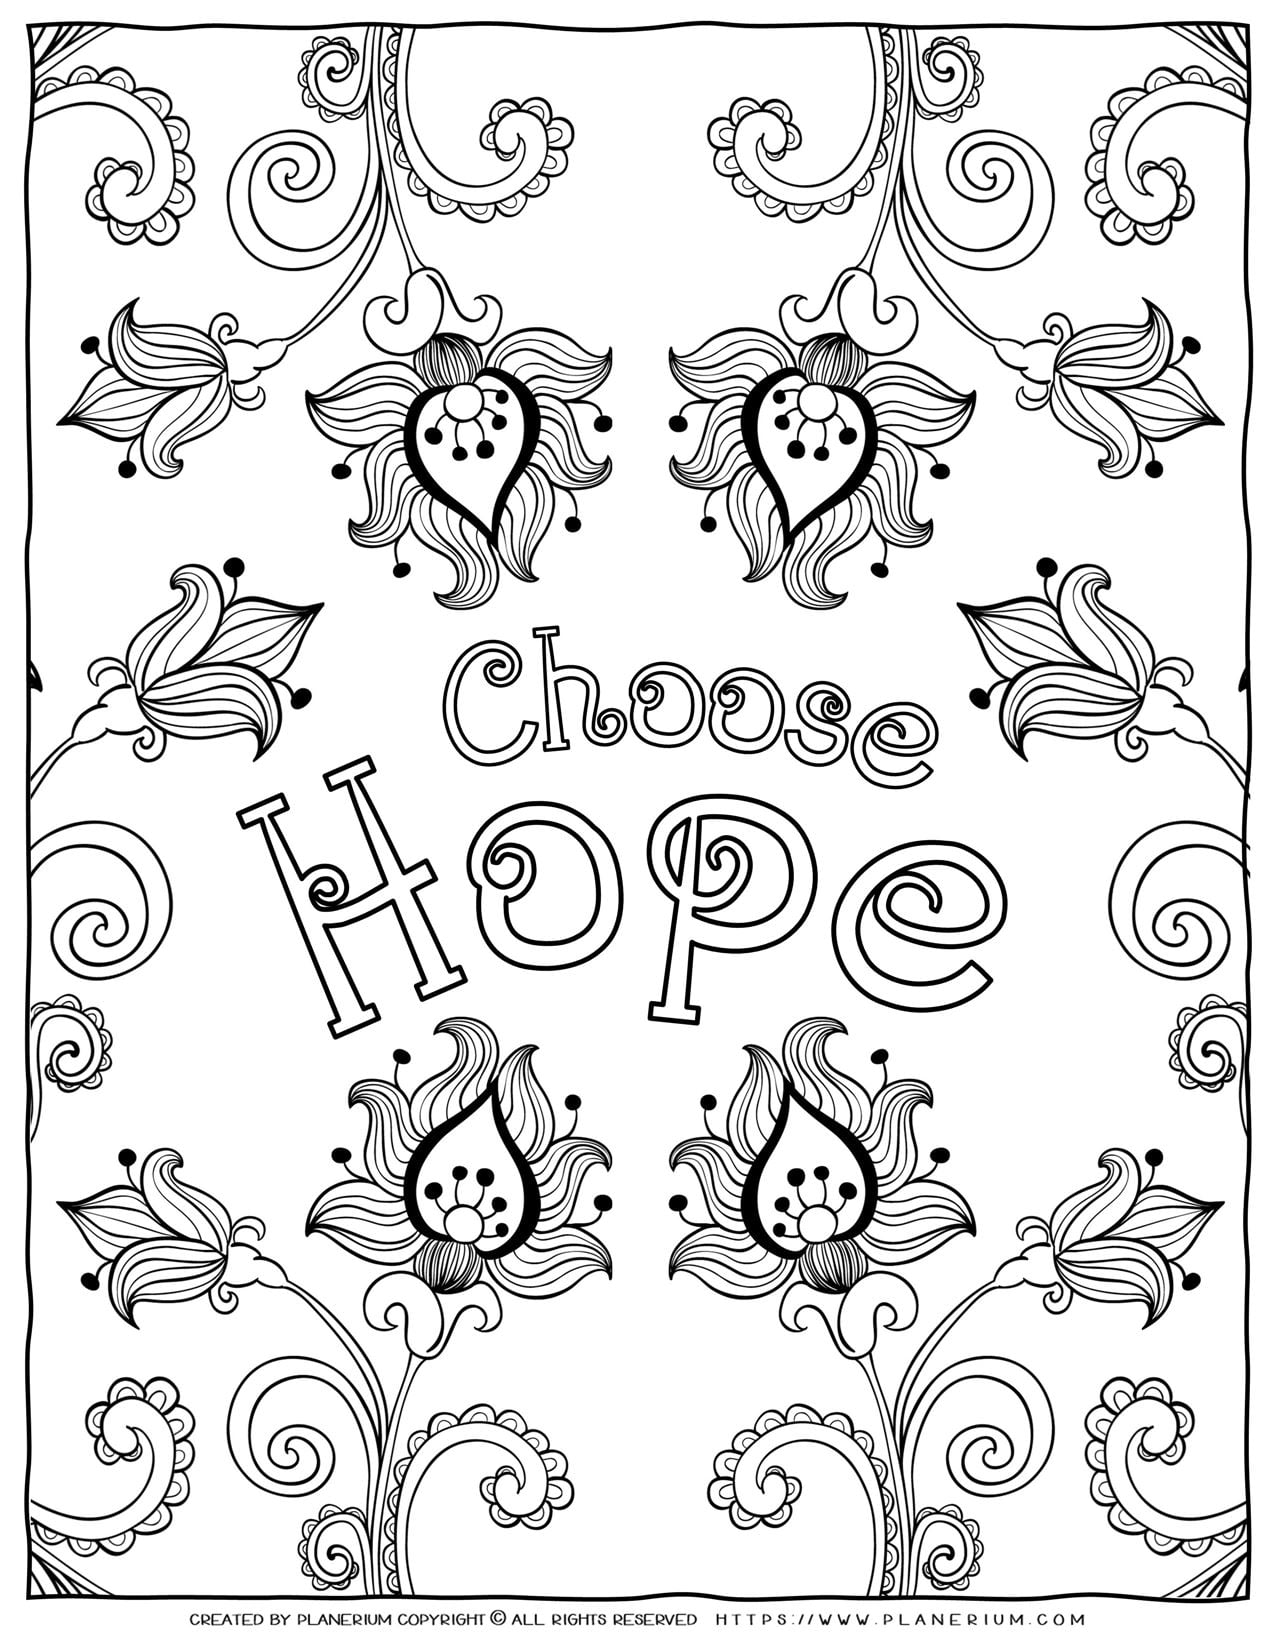 Adult Coloring Pages - Mindfulness Choose Hope | Planerium